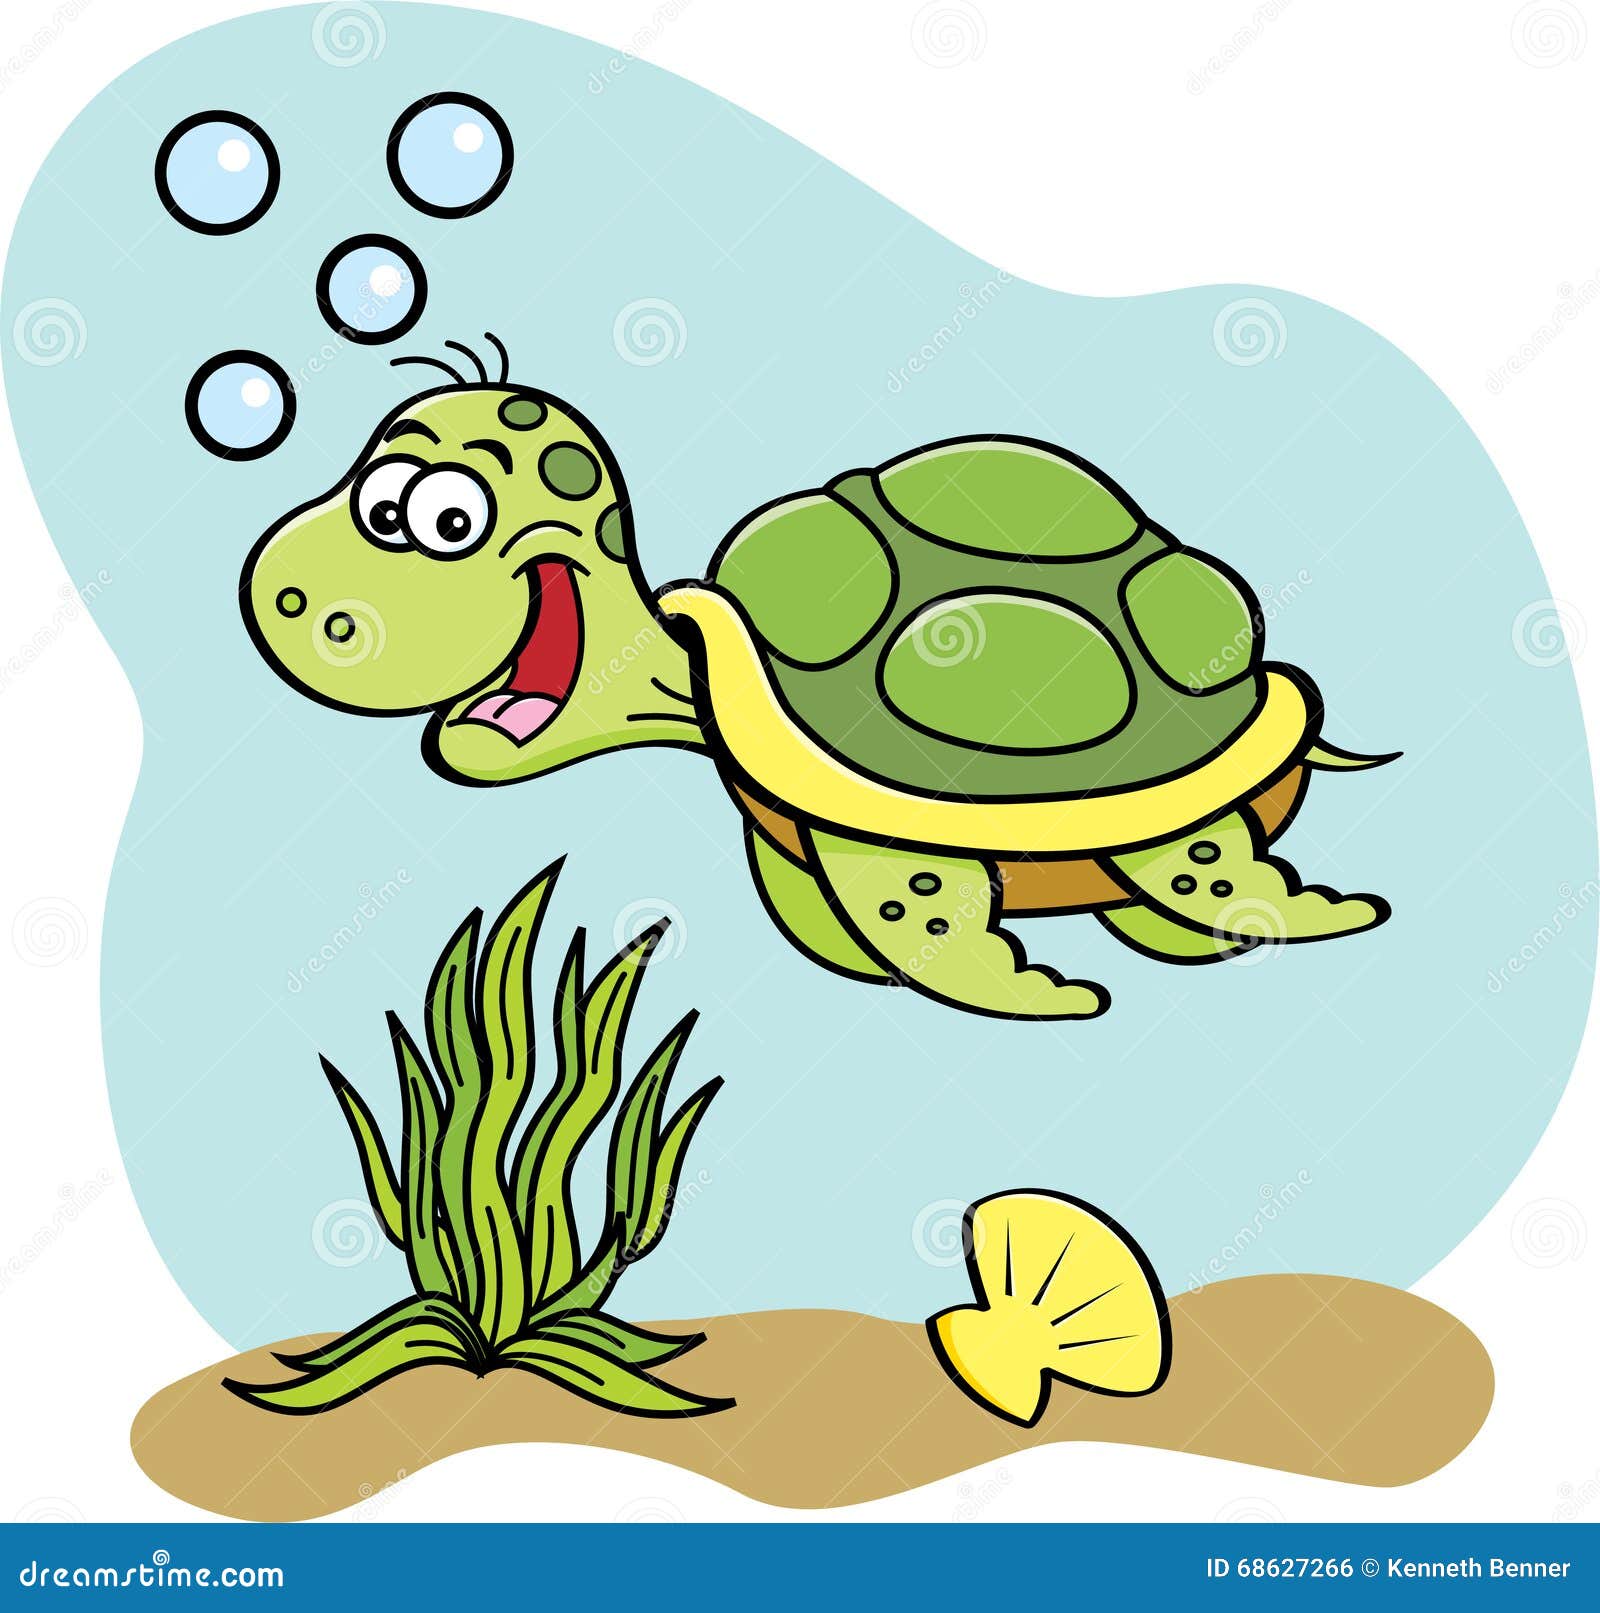 funny swimming clipart - photo #44